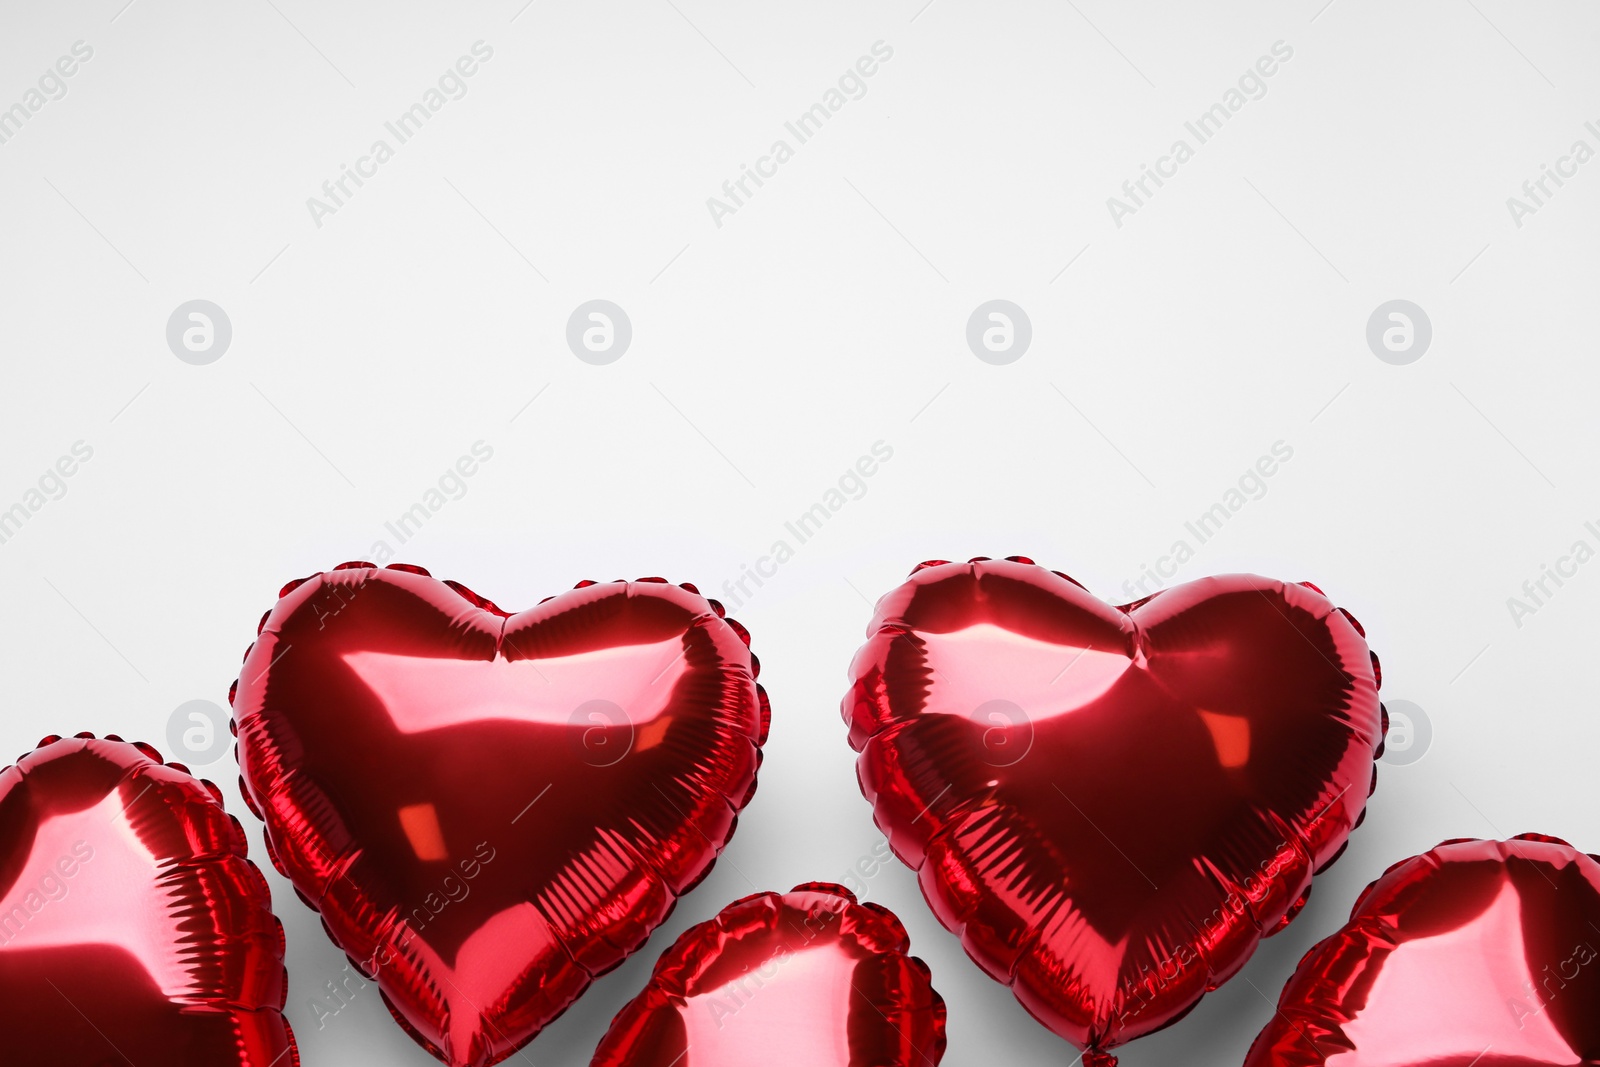 Photo of Red heart shaped balloons on white background, flat lay with space for text. Valentine's Day celebration